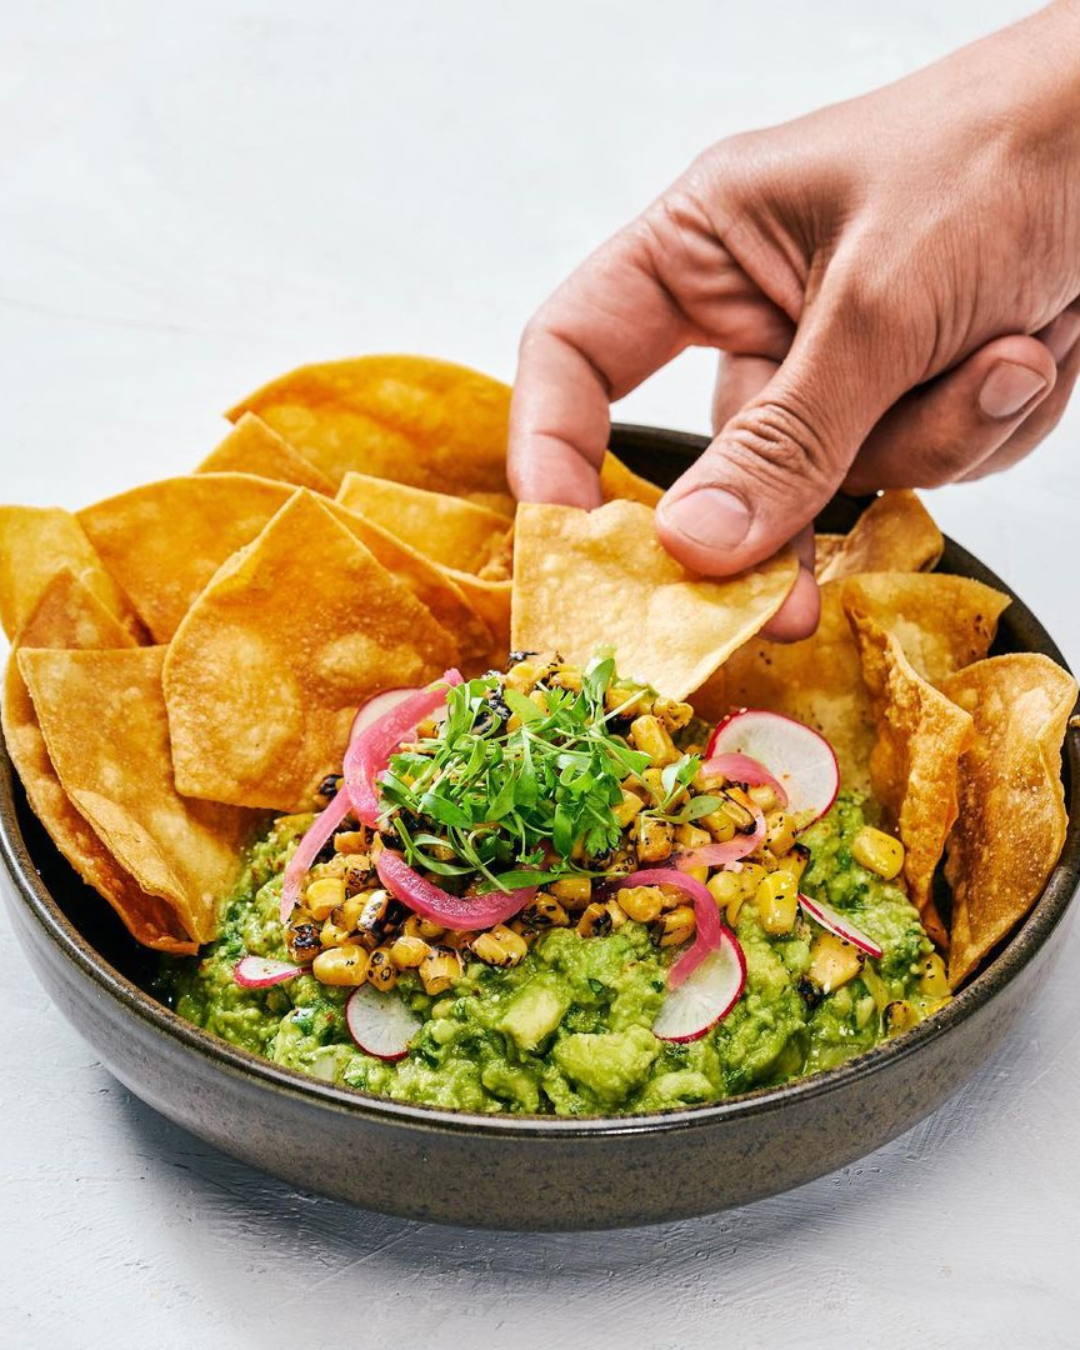 a person dipping a chip into a bowl of guacamole